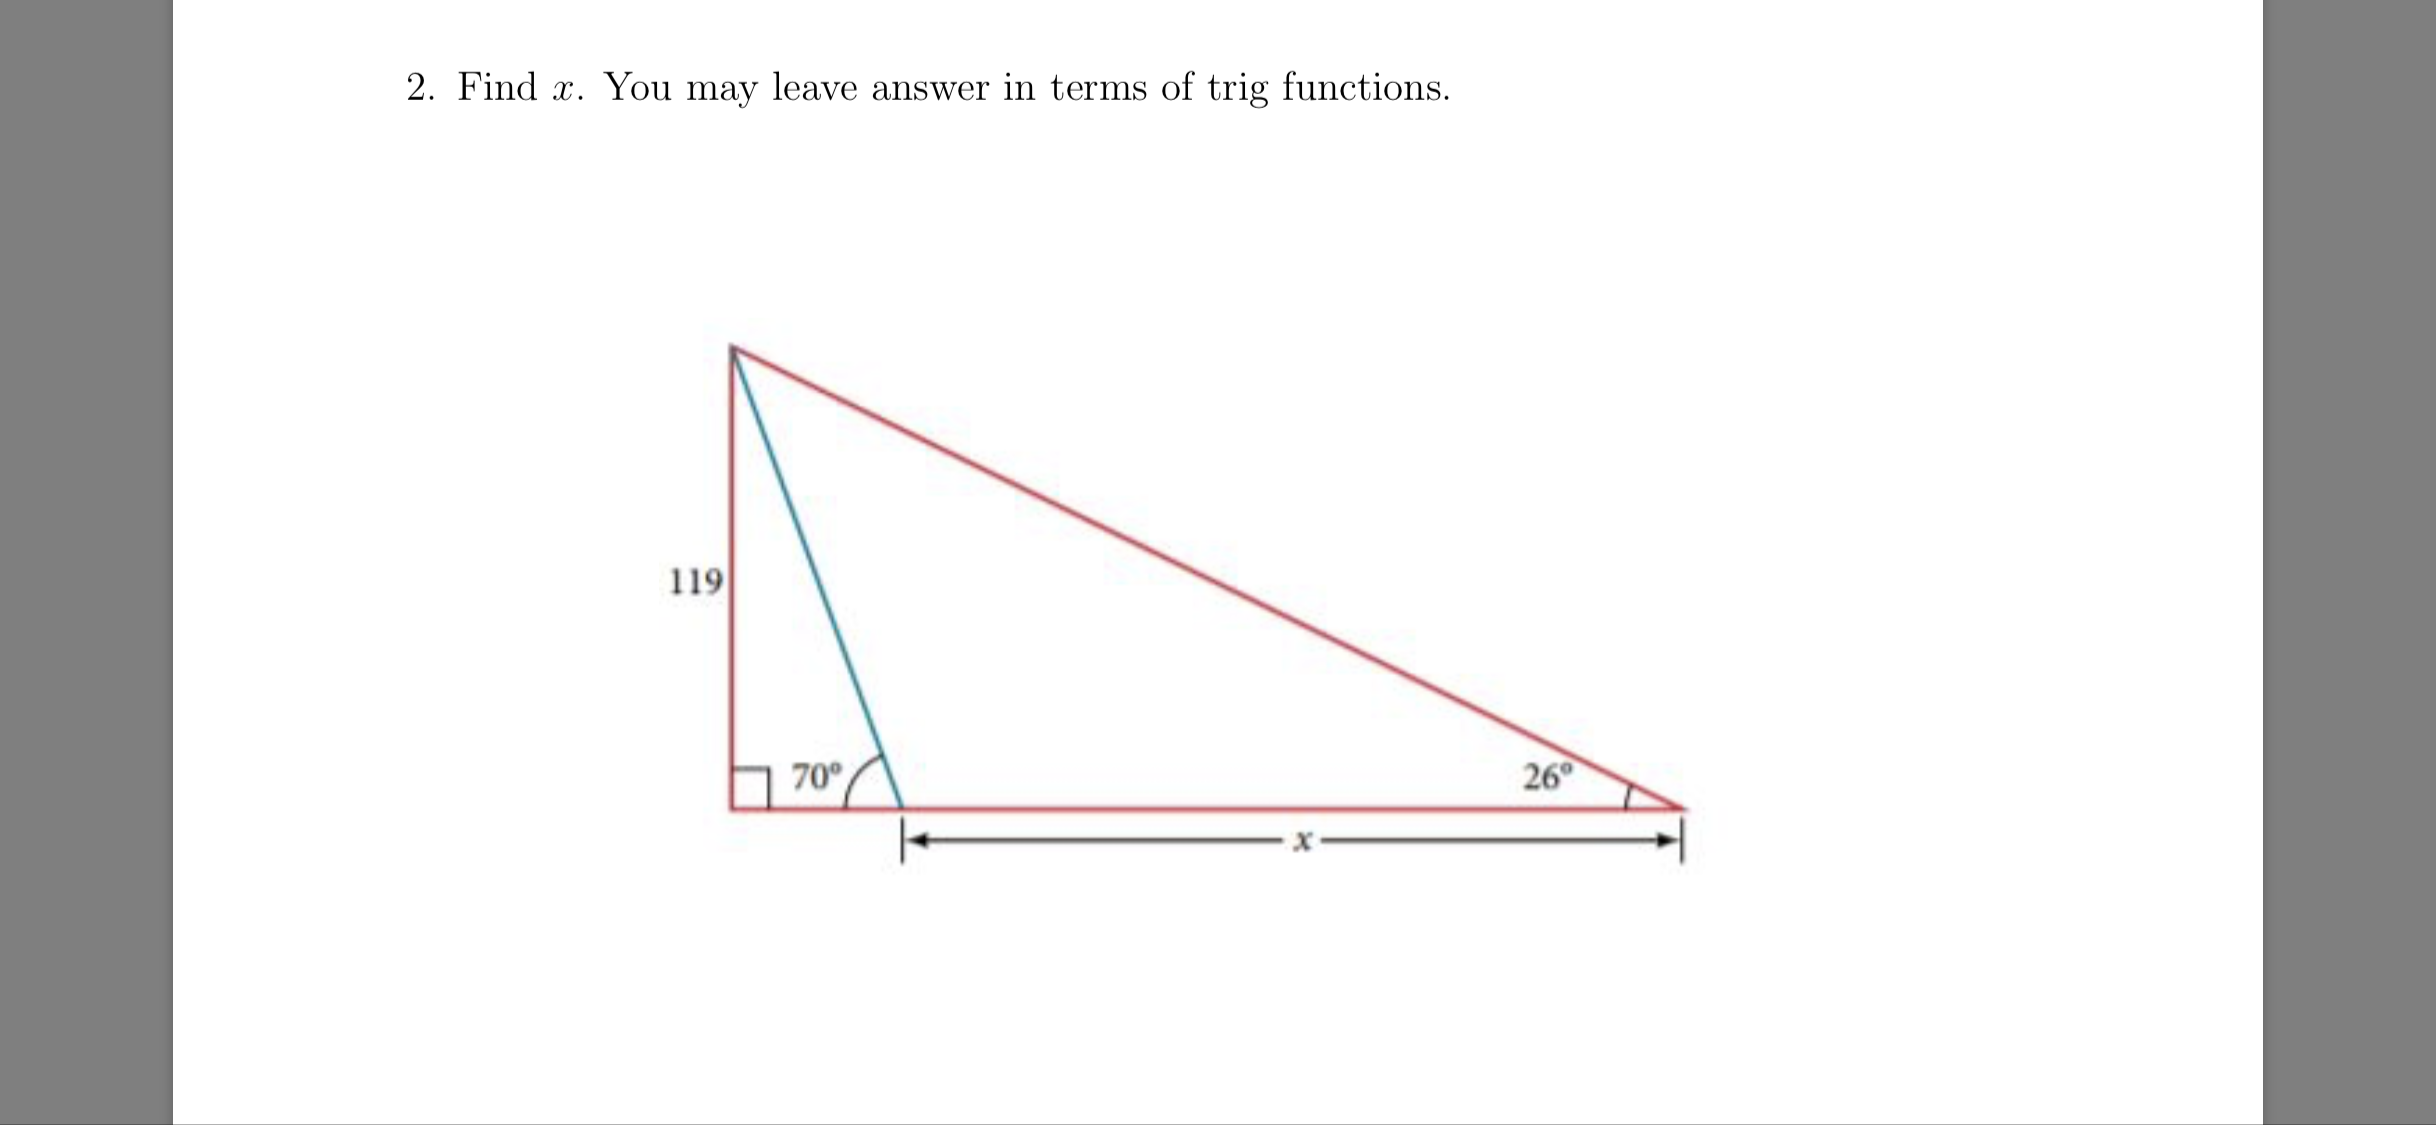 2. Find z. You may leave answer in terms of trig functions.
119
hed
70°
26°
